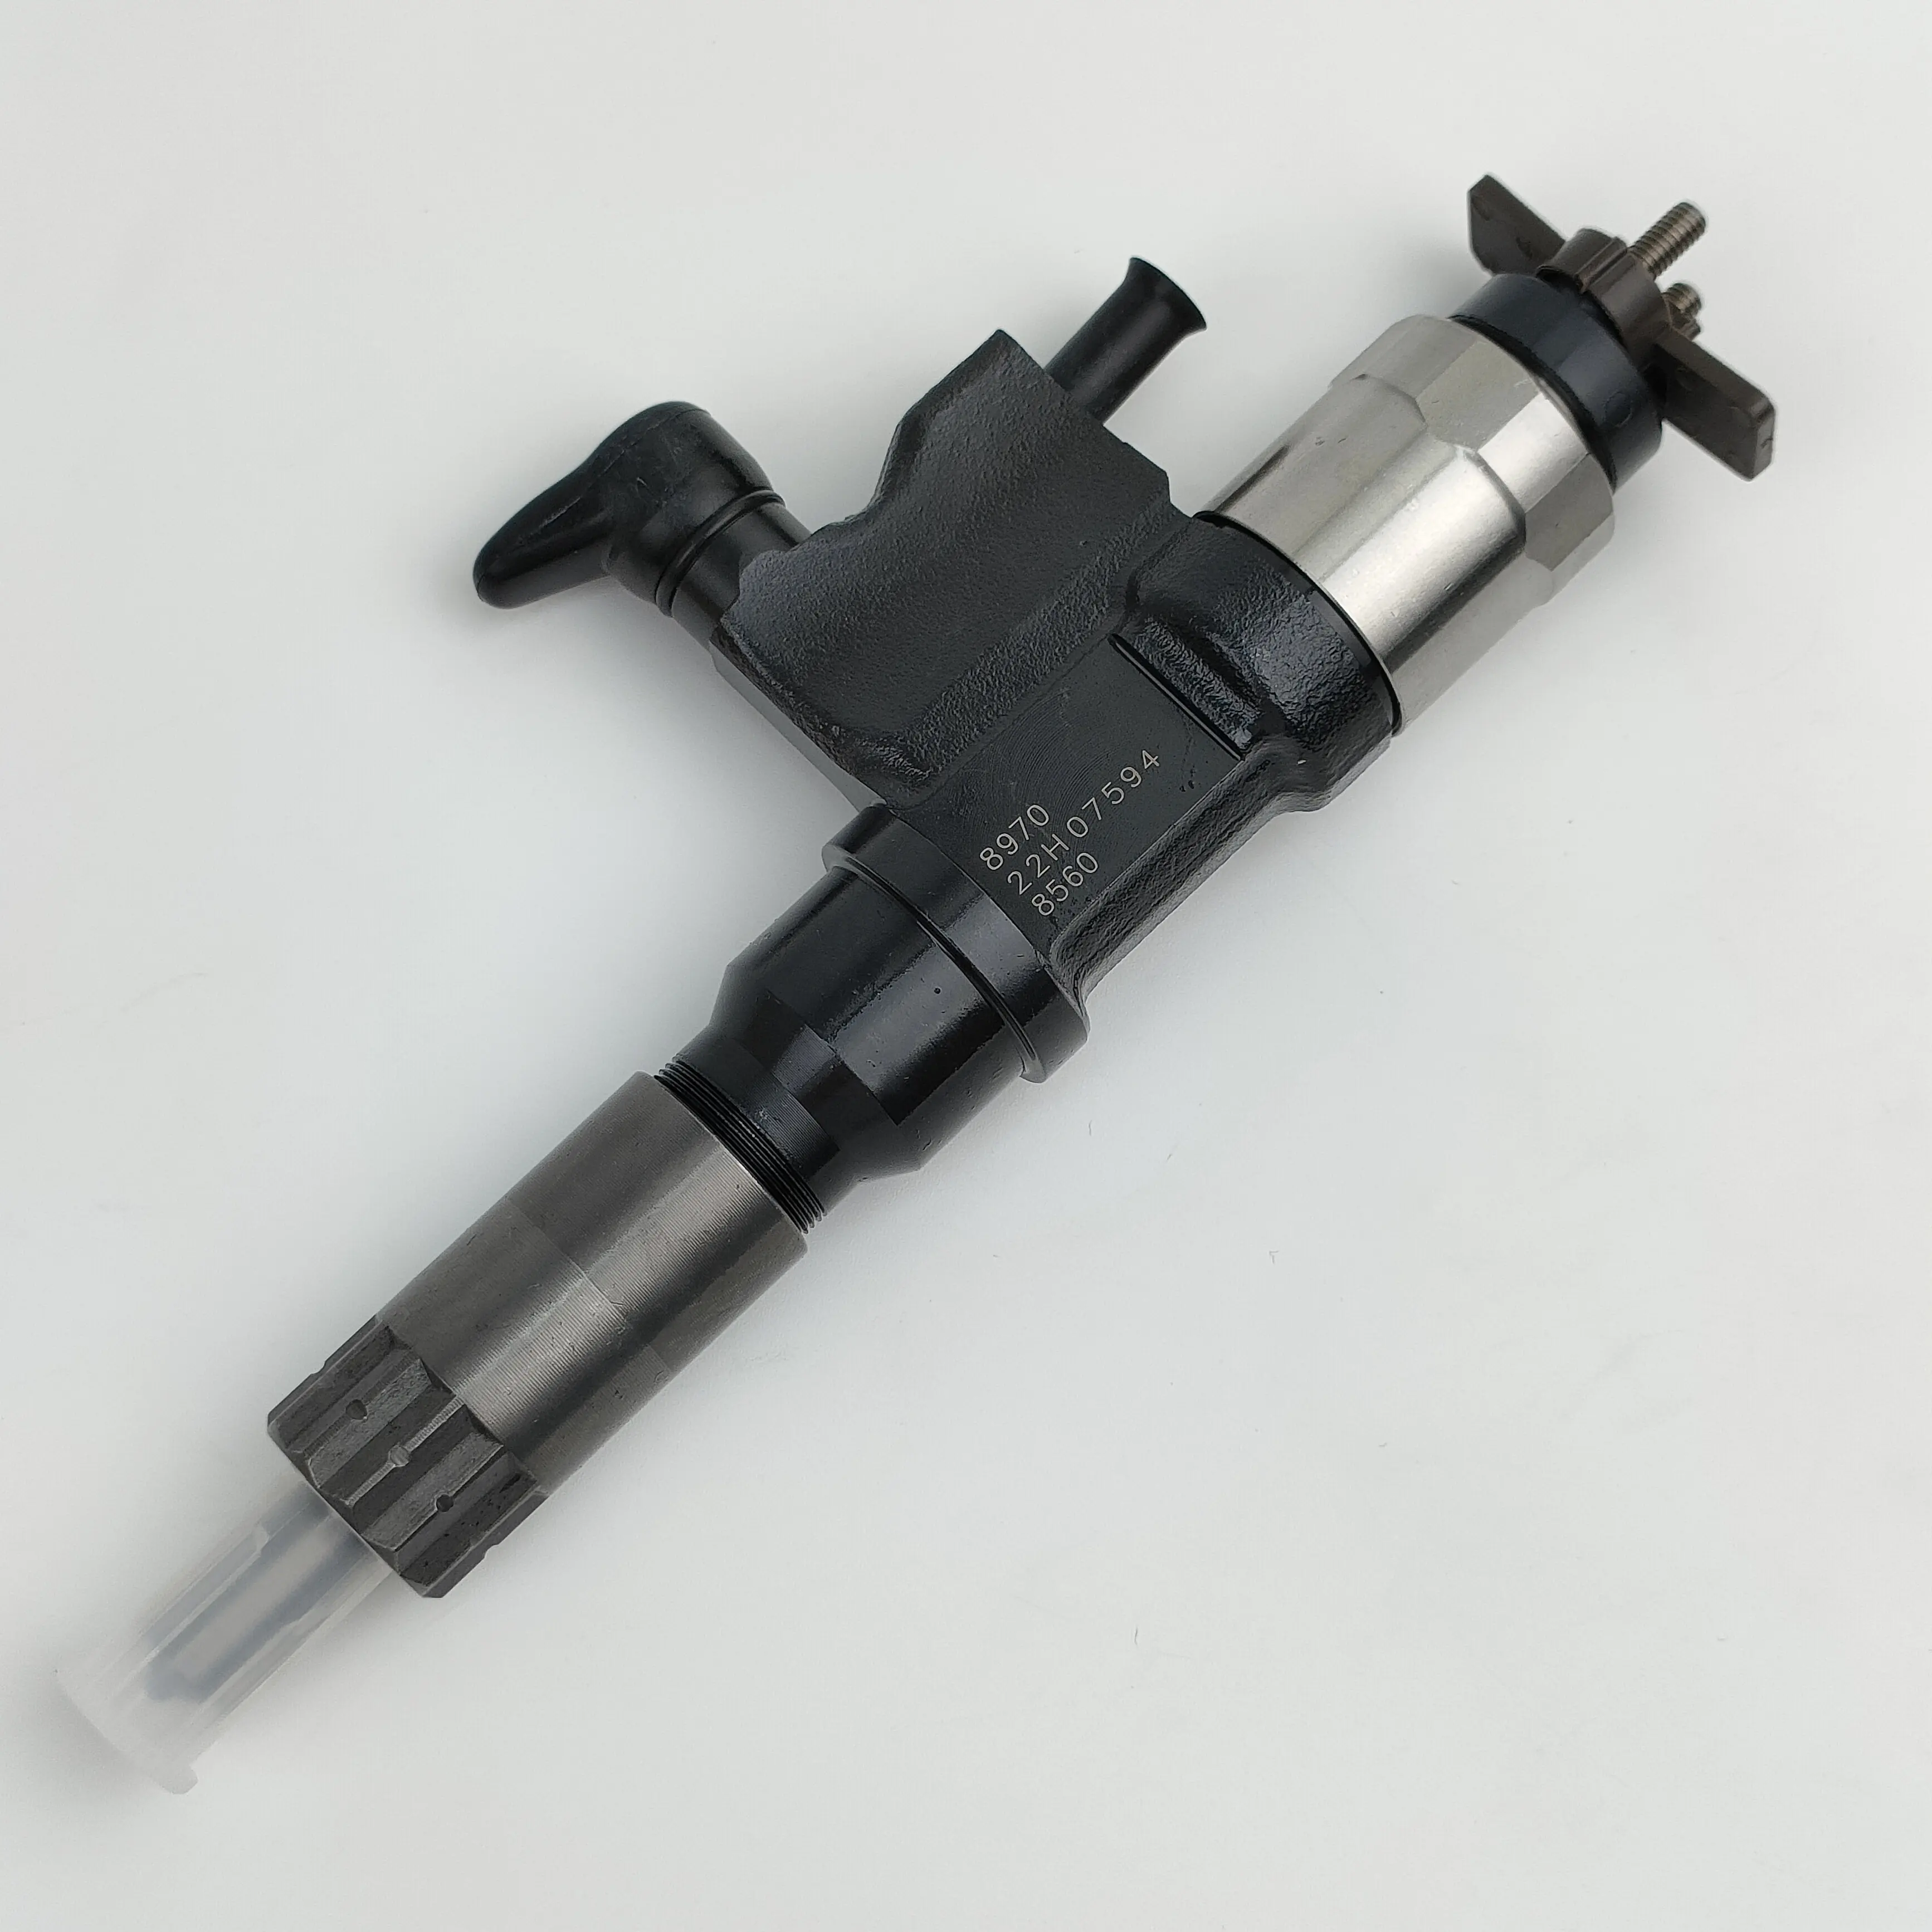 095000-8970 Common Rail Fuel Injector 8981518563 095000-8970 injector For ISUZU 4HK1 engine